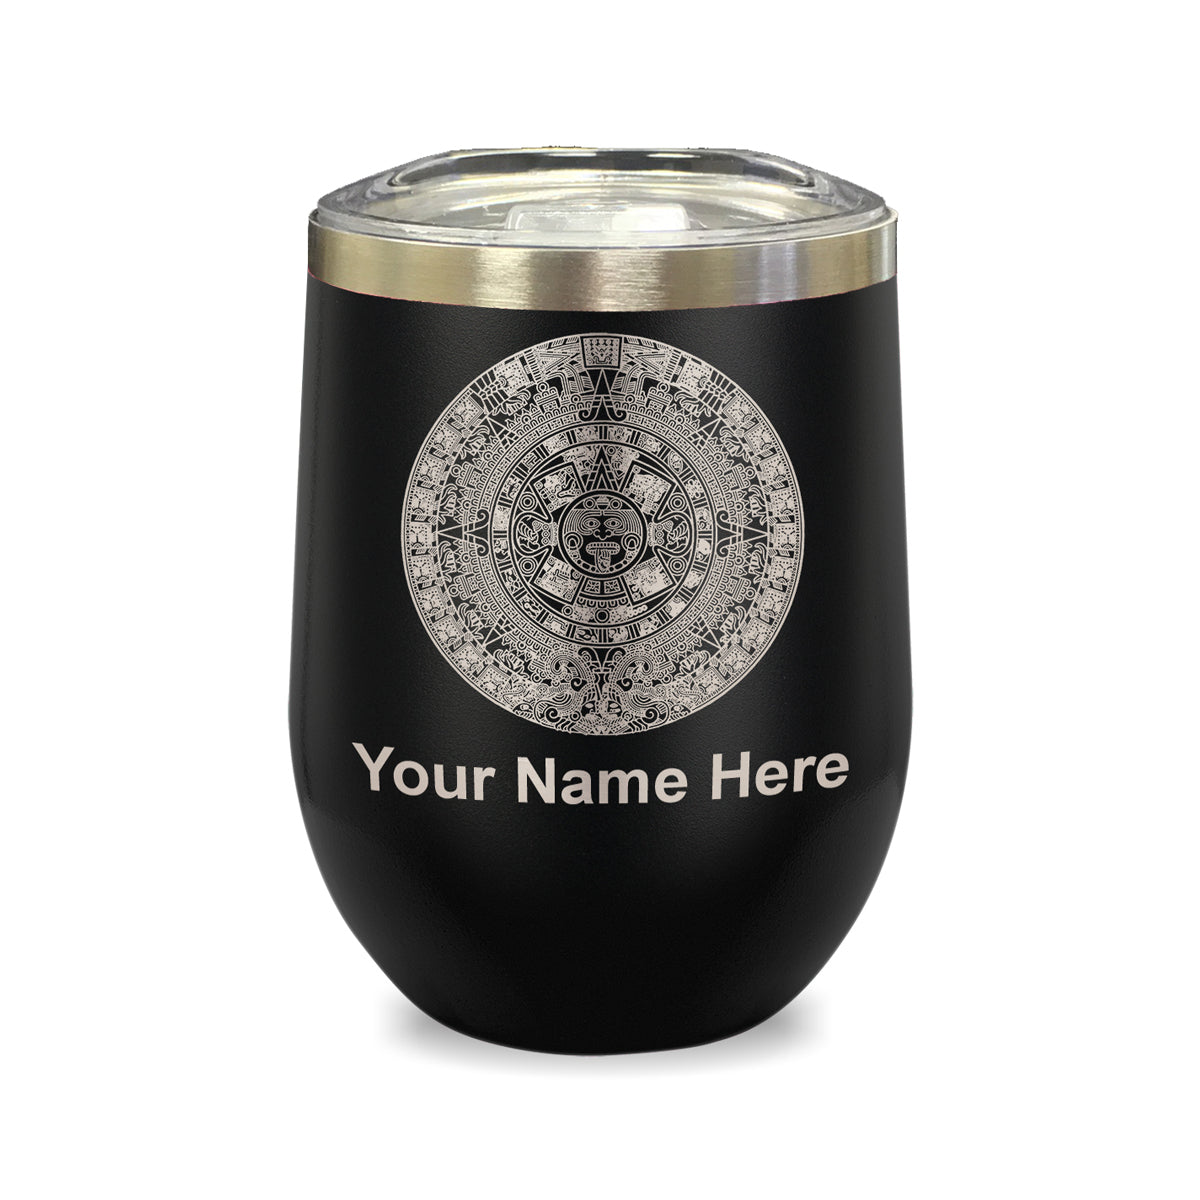 LaserGram Double Wall Stainless Steel Wine Glass, Aztec Calendar, Personalized Engraving Included